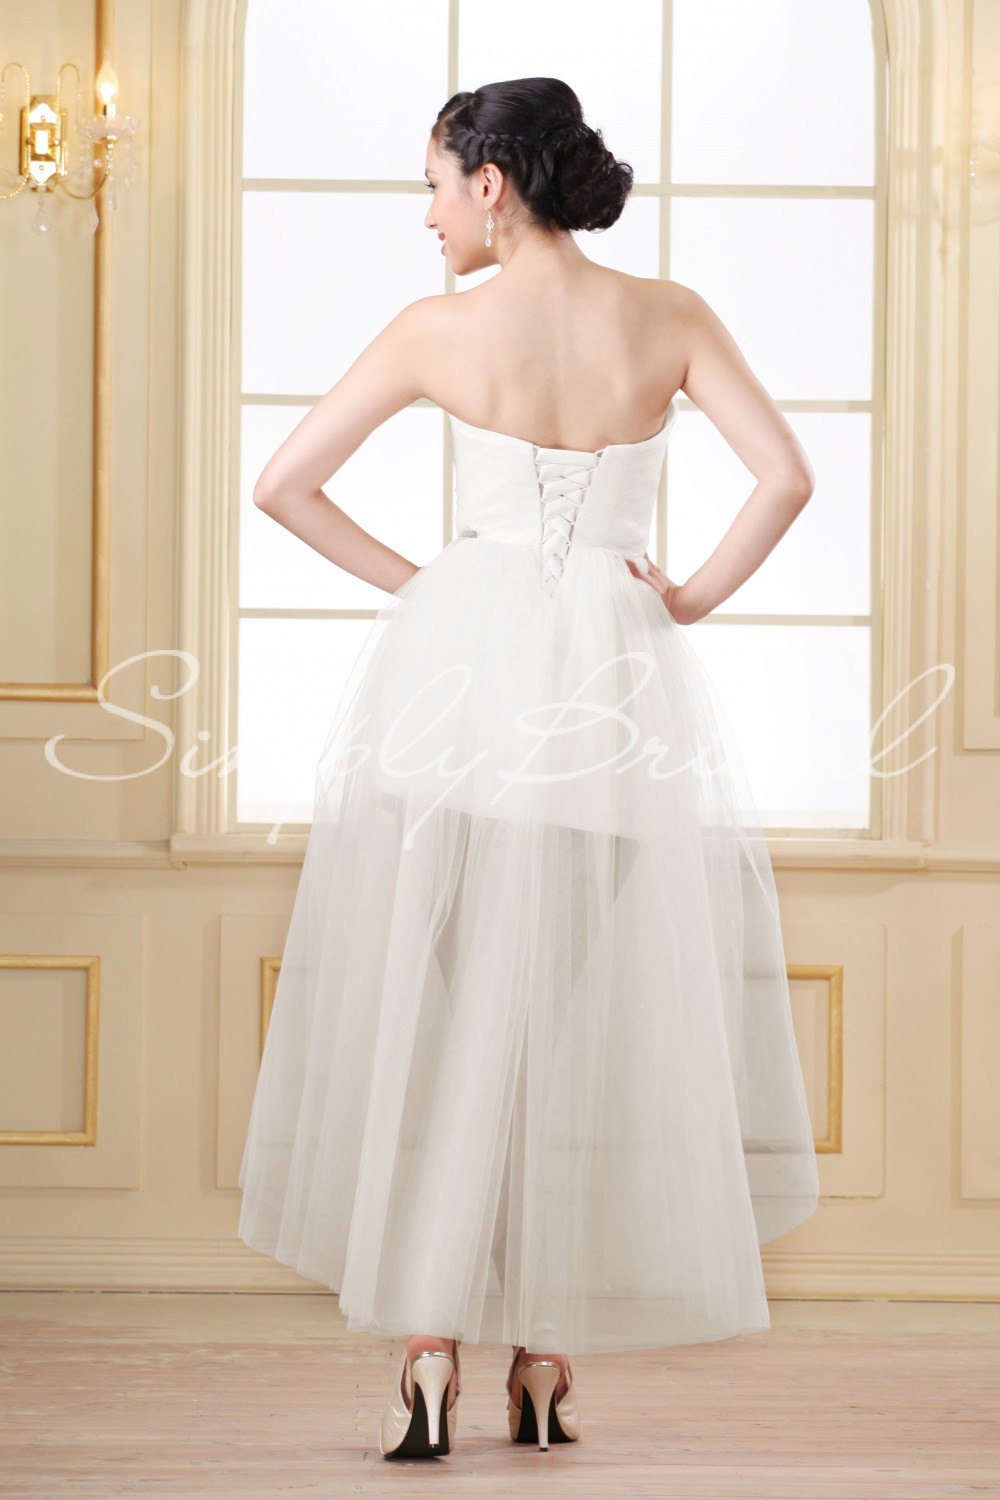 2013 wedding dress trends dress back lacing guest post by lavimage montreal